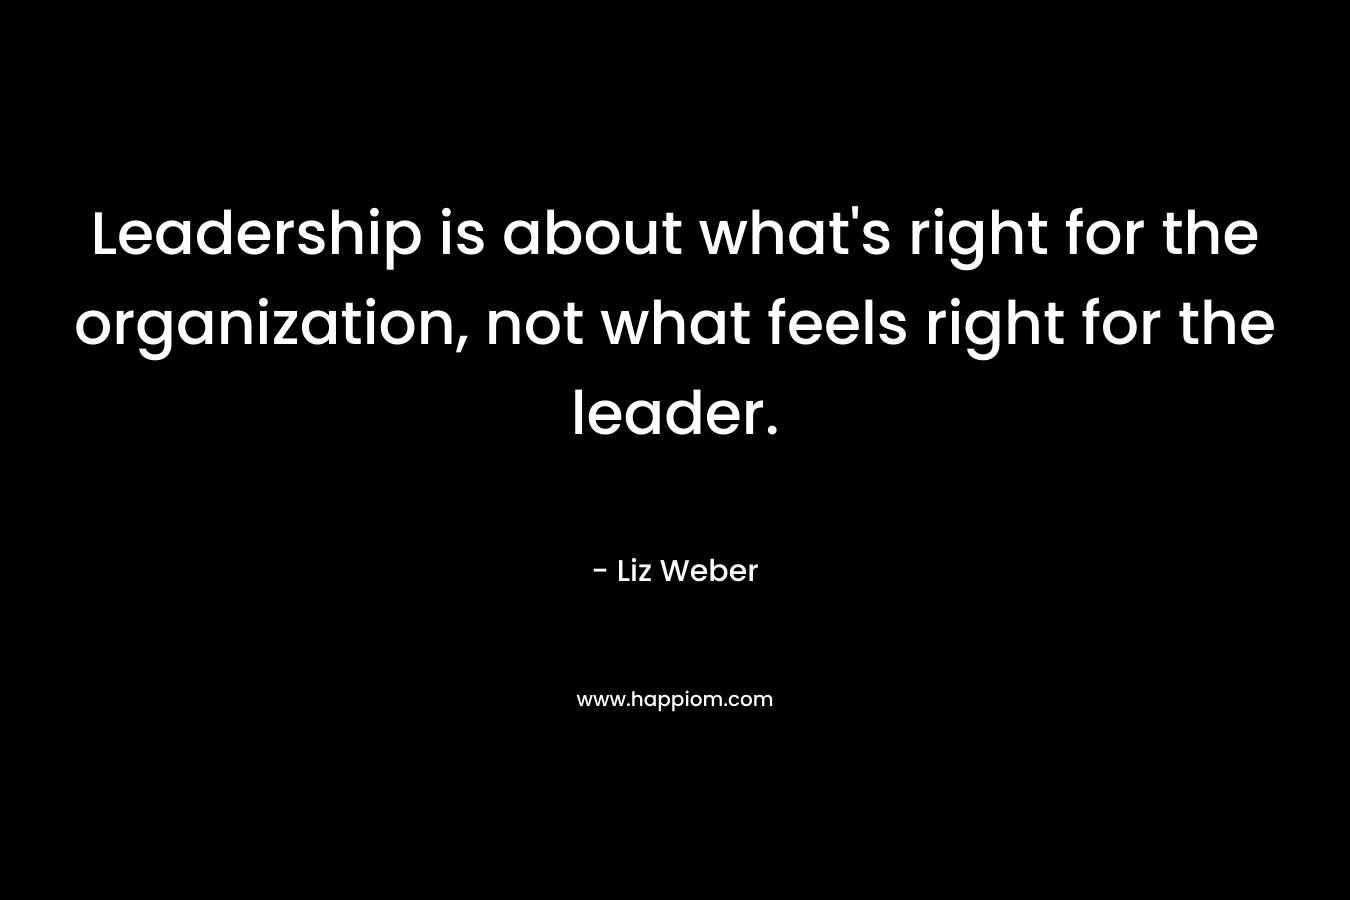 Leadership is about what’s right for the organization, not what feels right for the leader. – Liz Weber